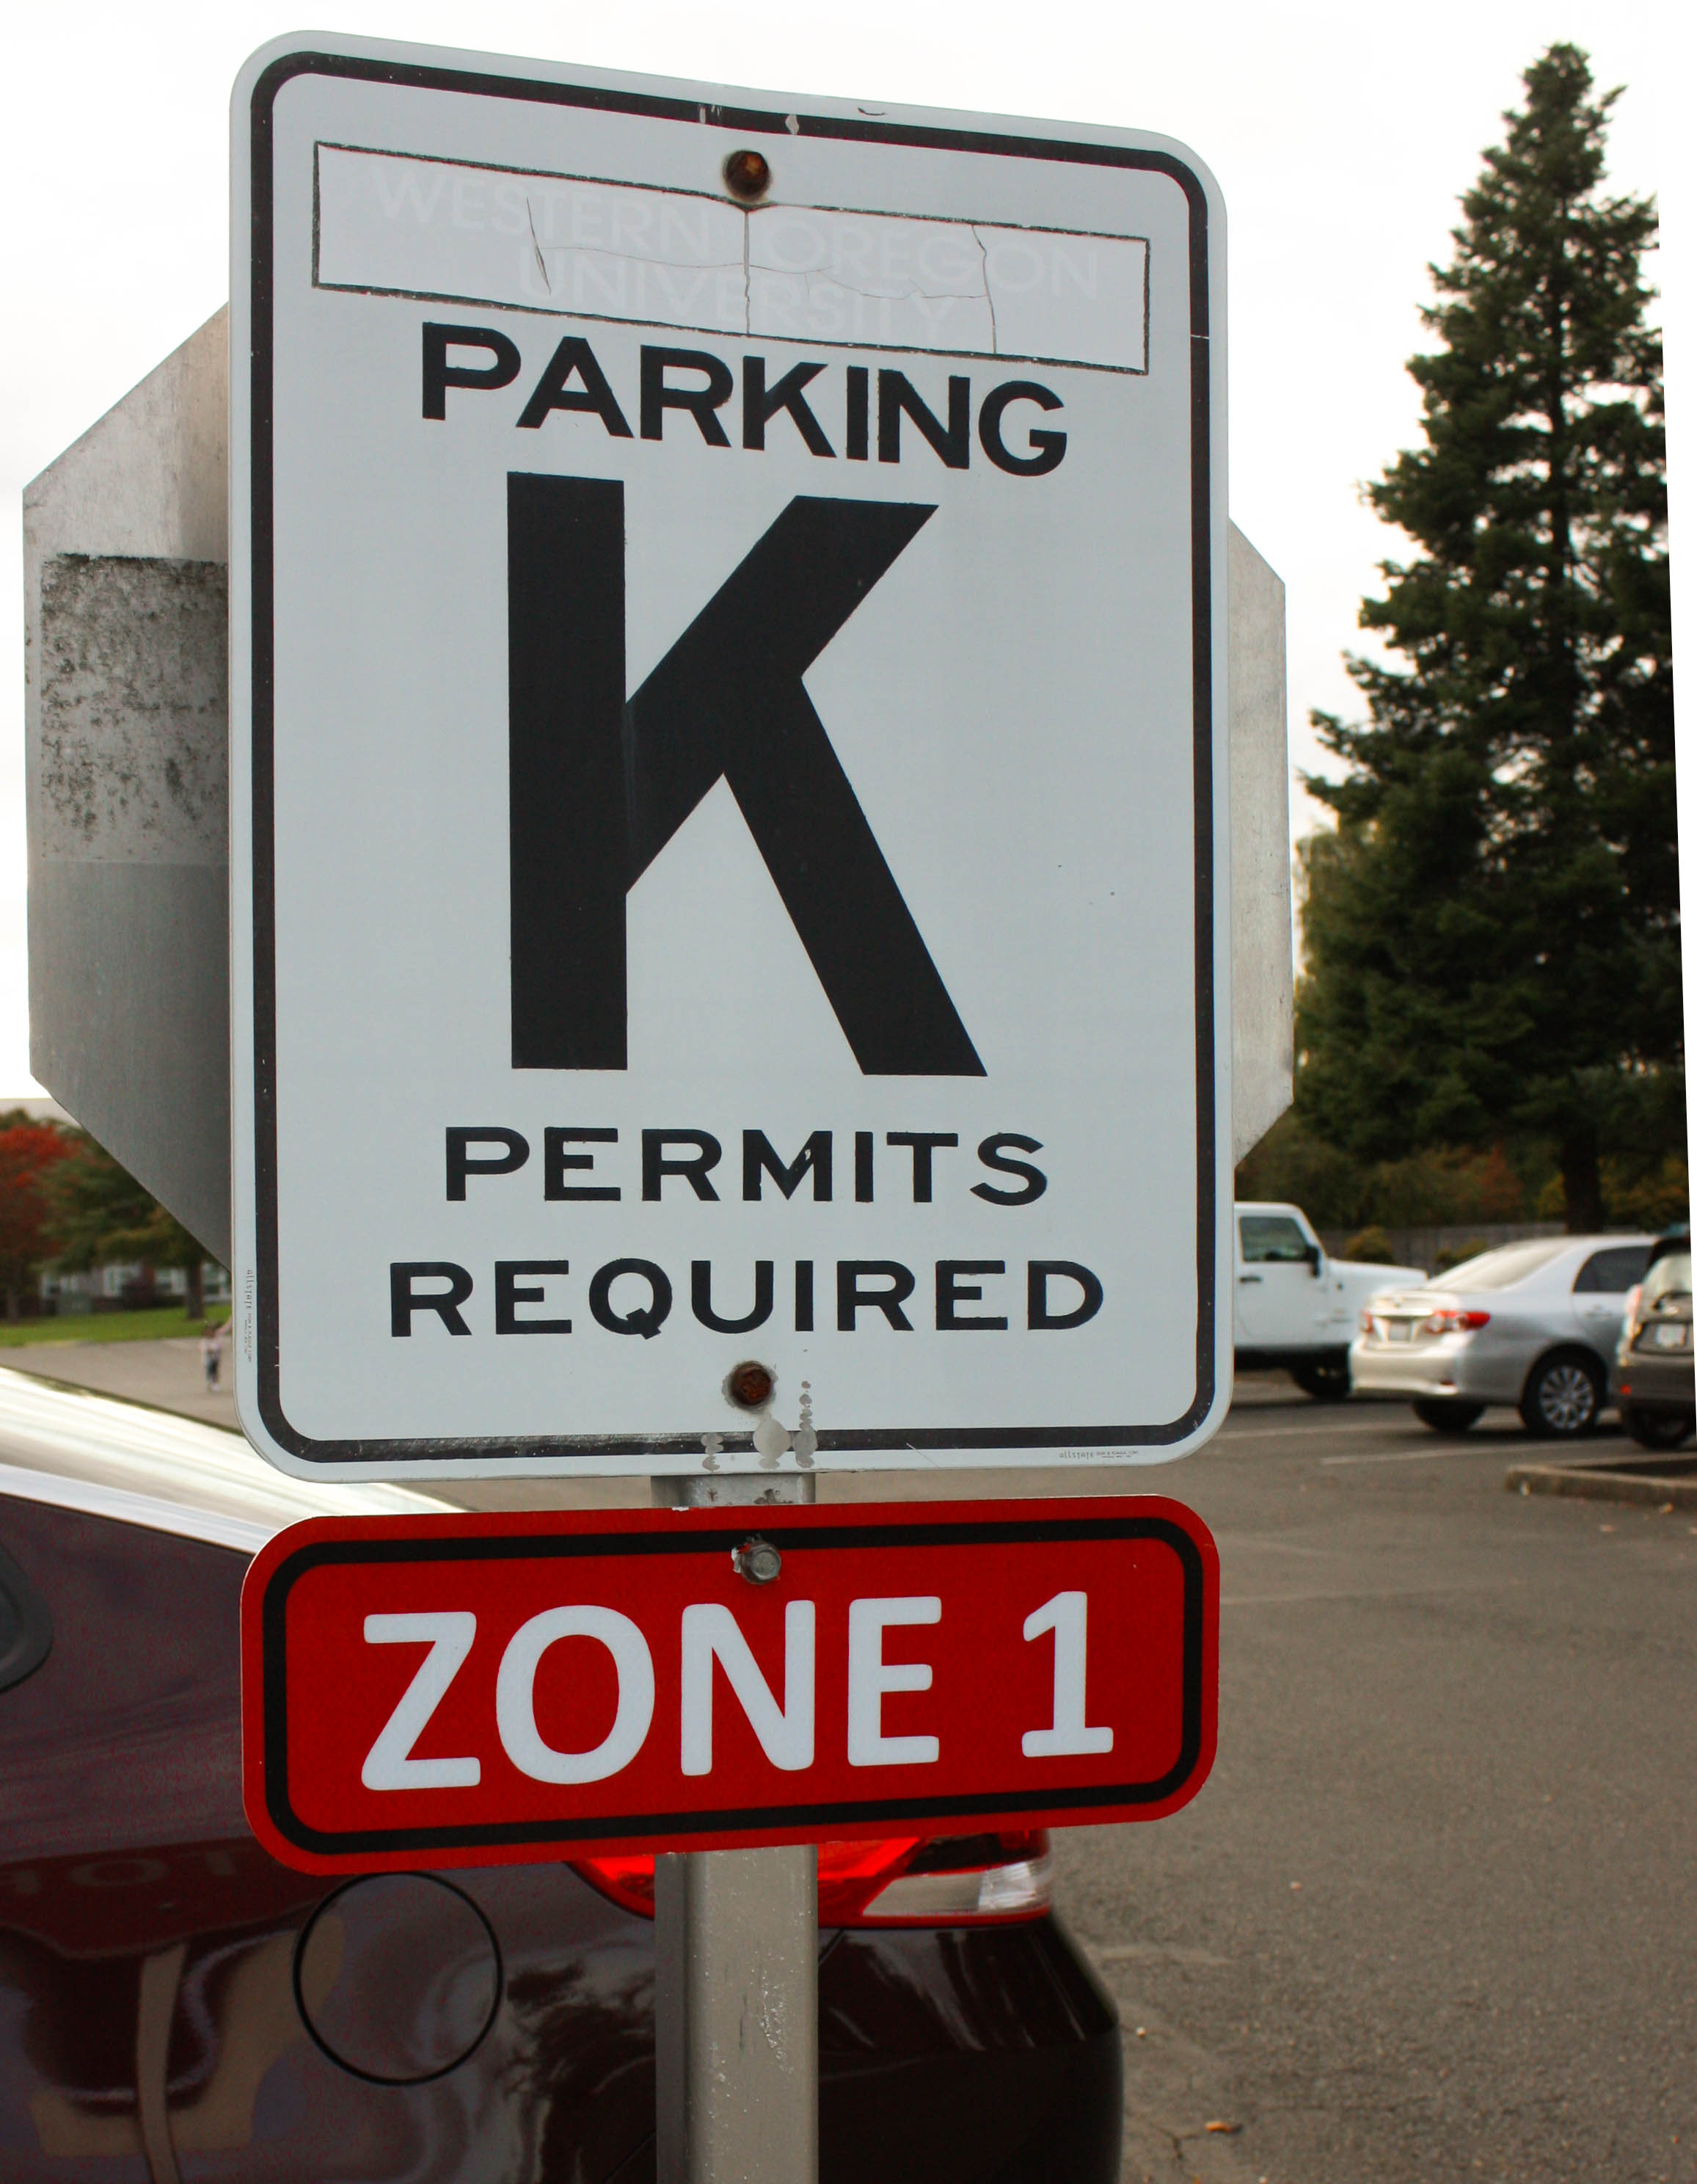 “Zones” are a new parking strategy created by public safety in response to affordability concerns.